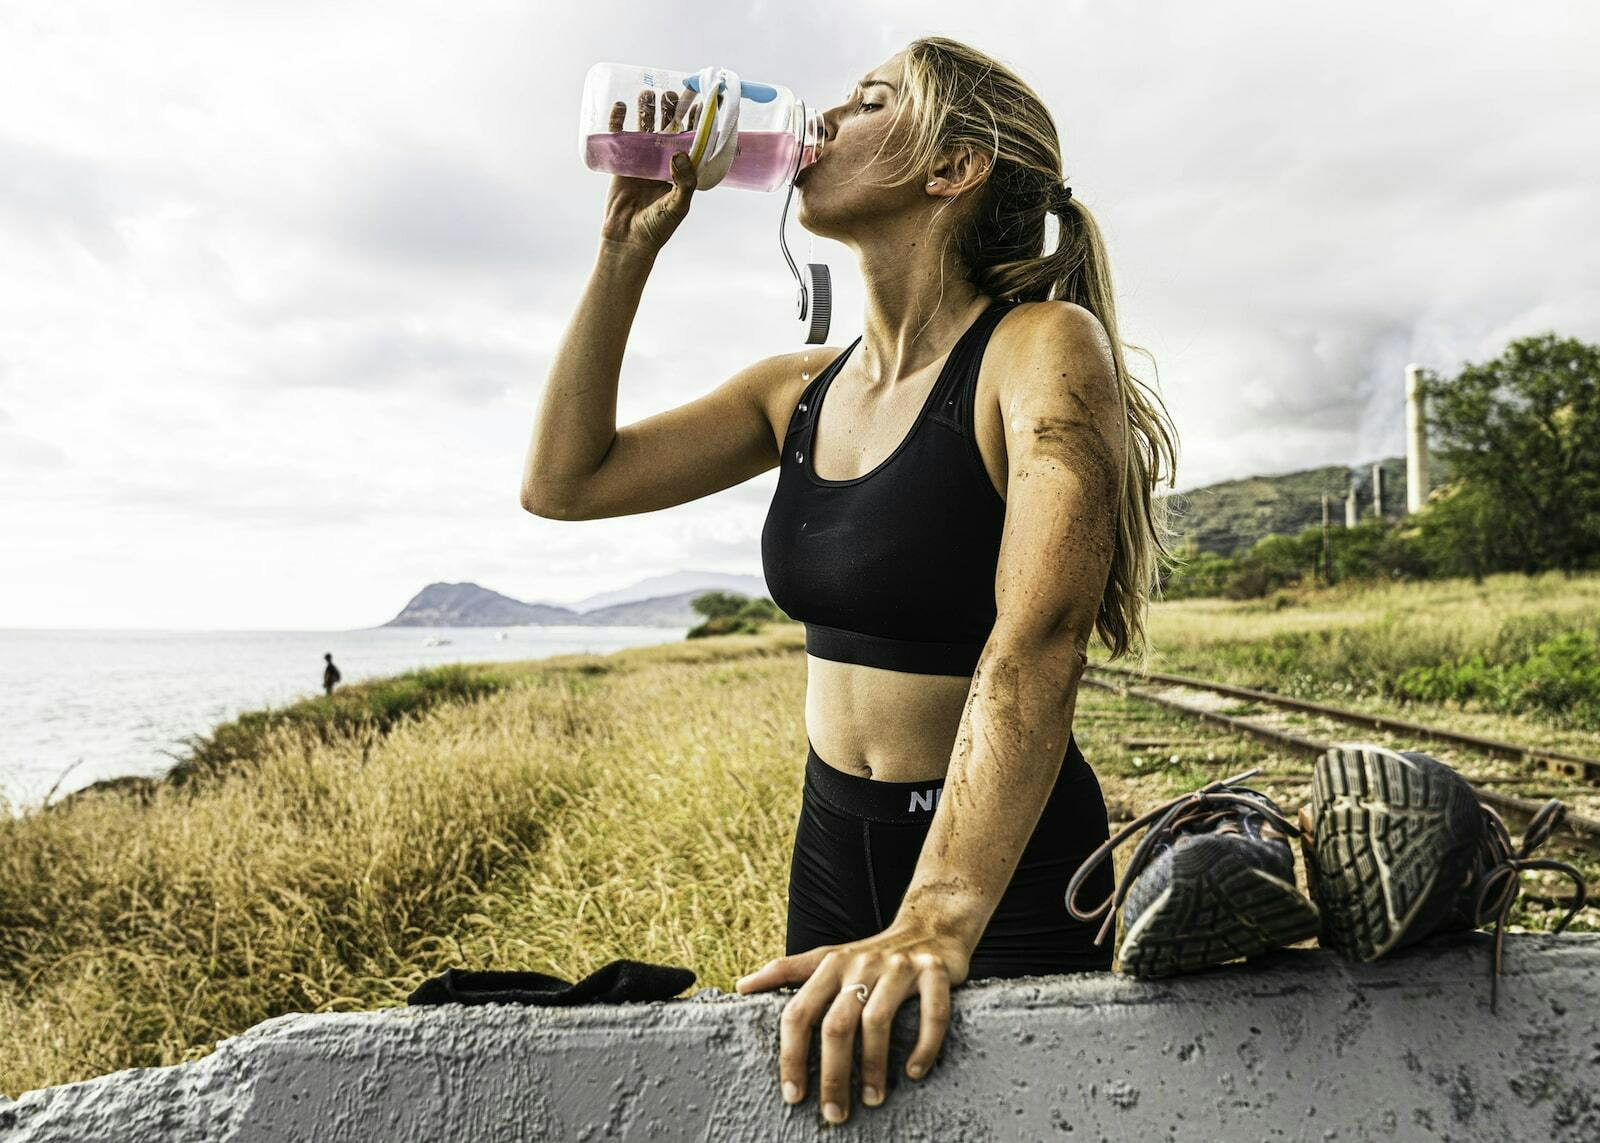 Best way to replenish electrolytes: Athlete drinking DripDrop ORS outdoors